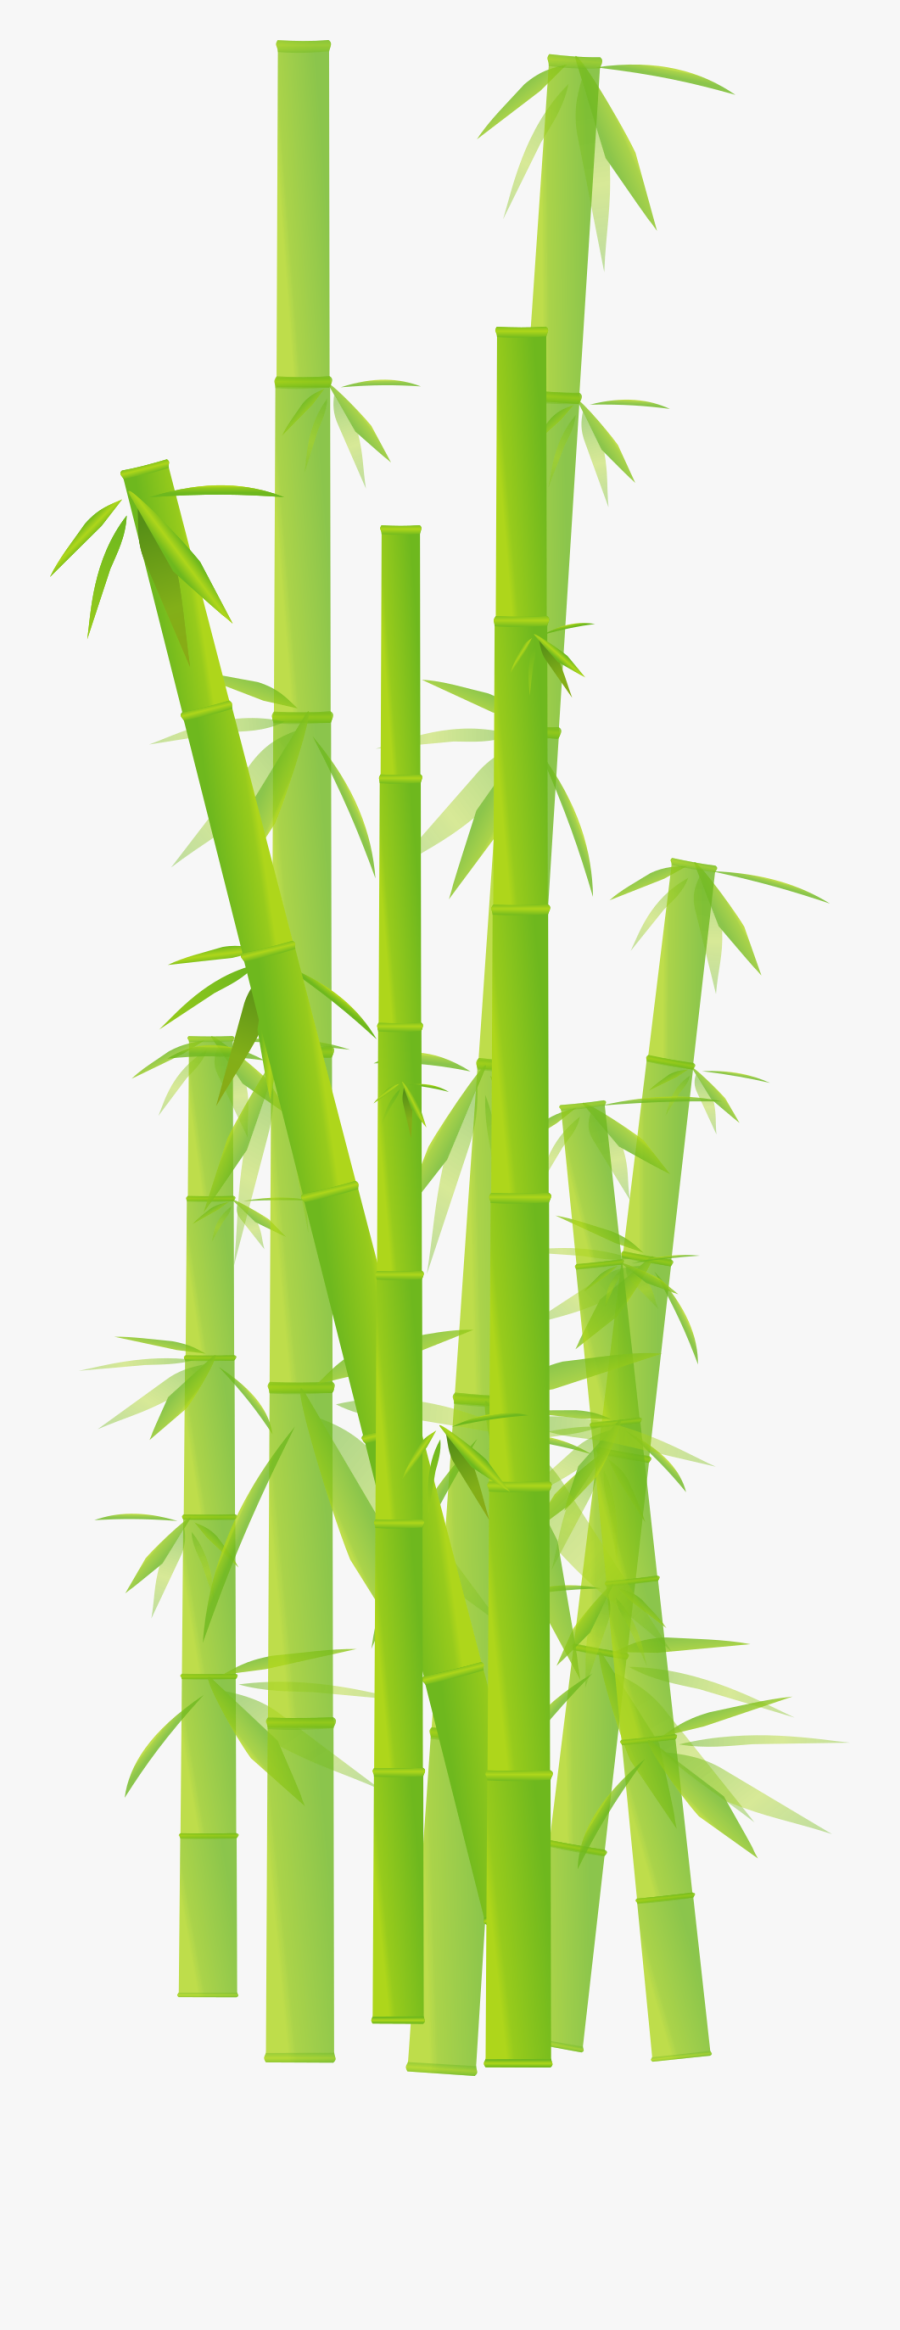 Collection Of Free Bamboo Vector Art - Transparent Background Bamboo Clipart, Transparent Clipart